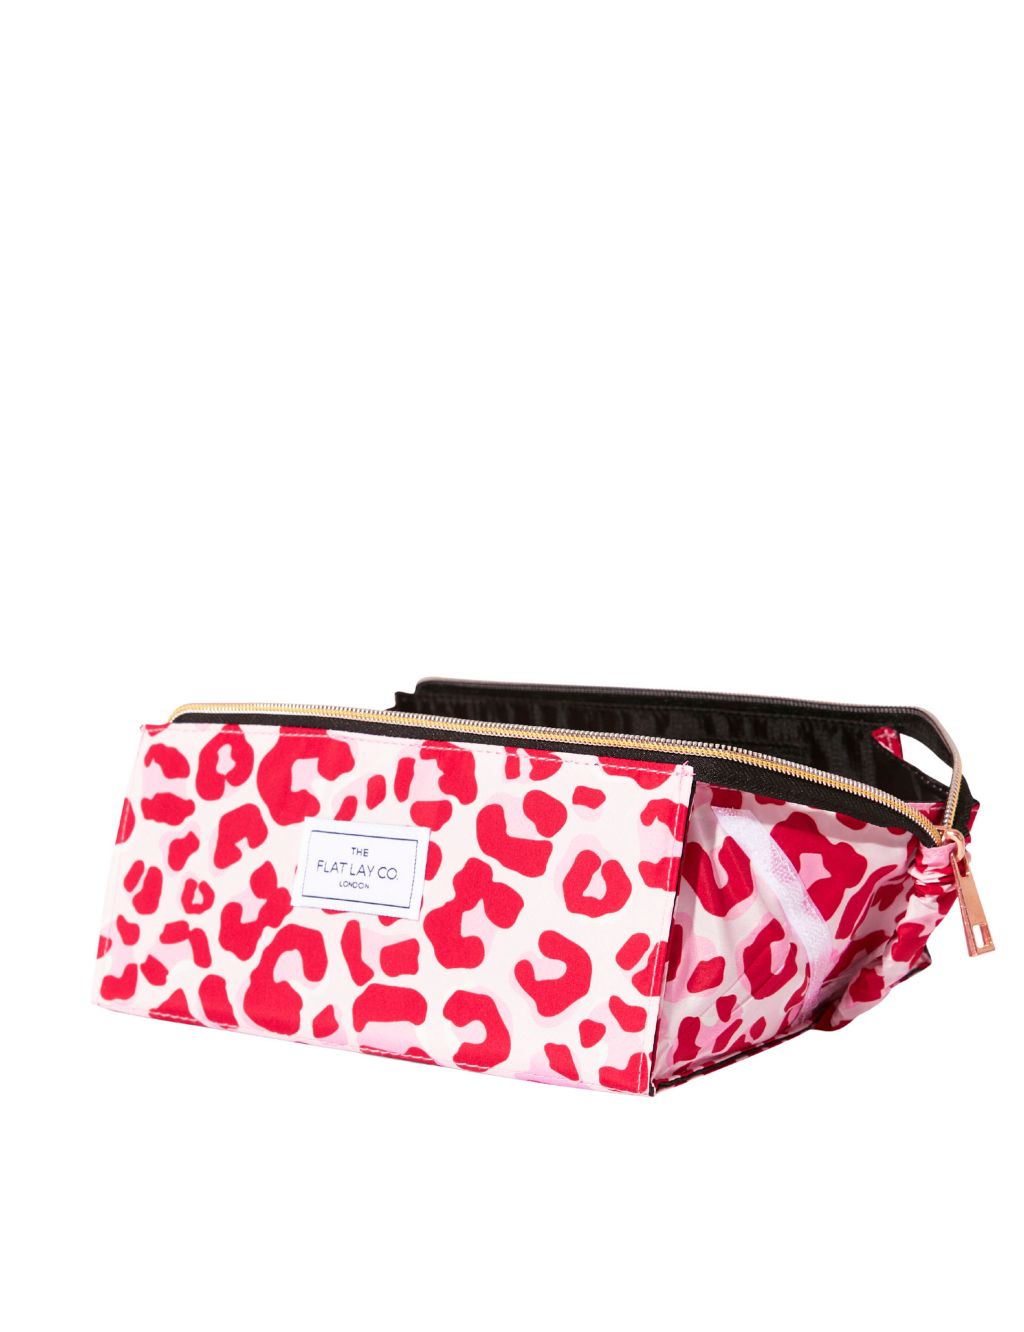 Makeup Box Bag In Pink Leopard | The Flat Lay Co. | M&S